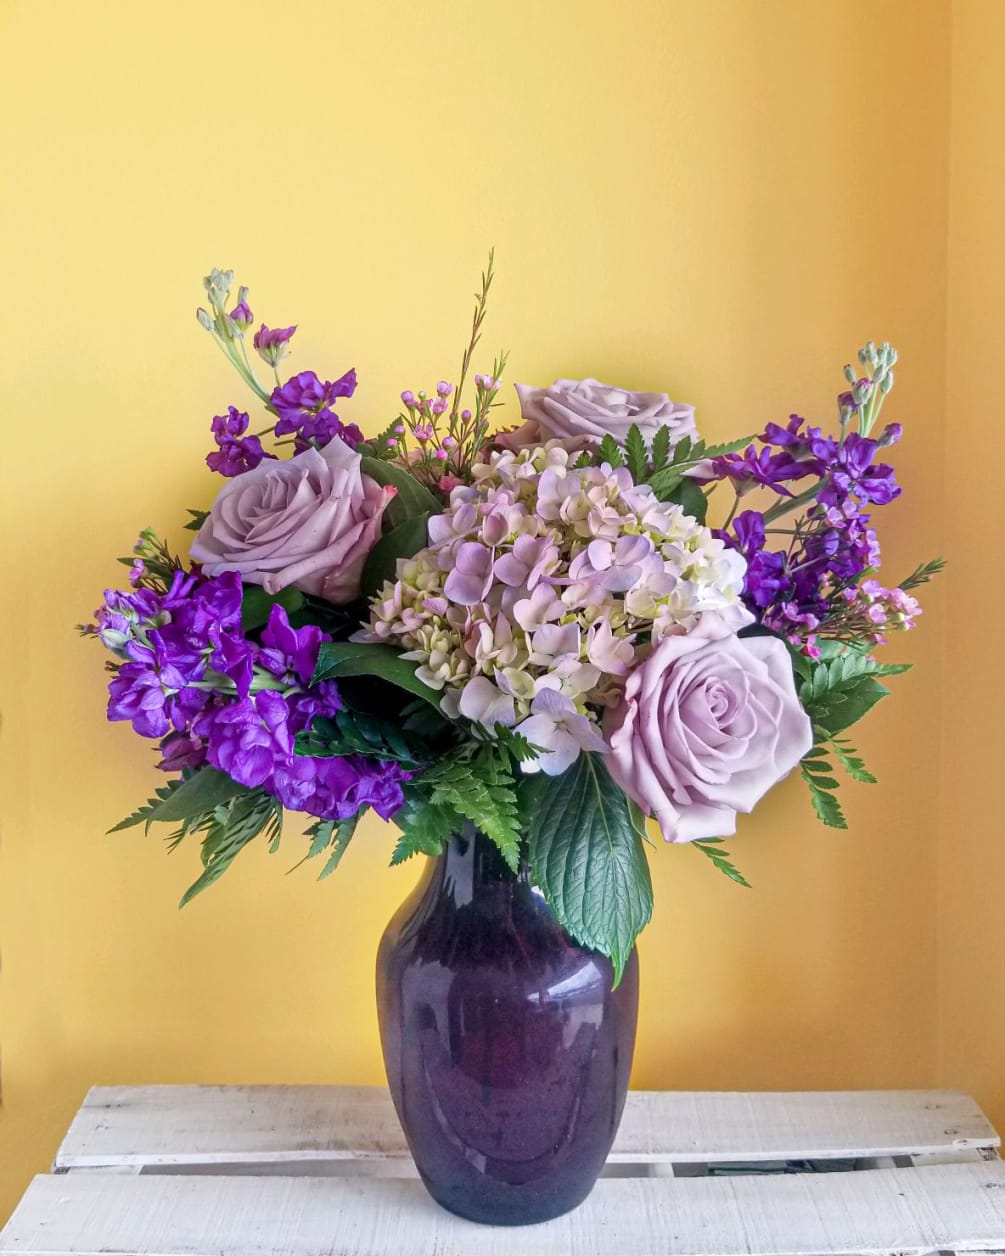 A Designers Choice of various shades of purple flowers.  Using the